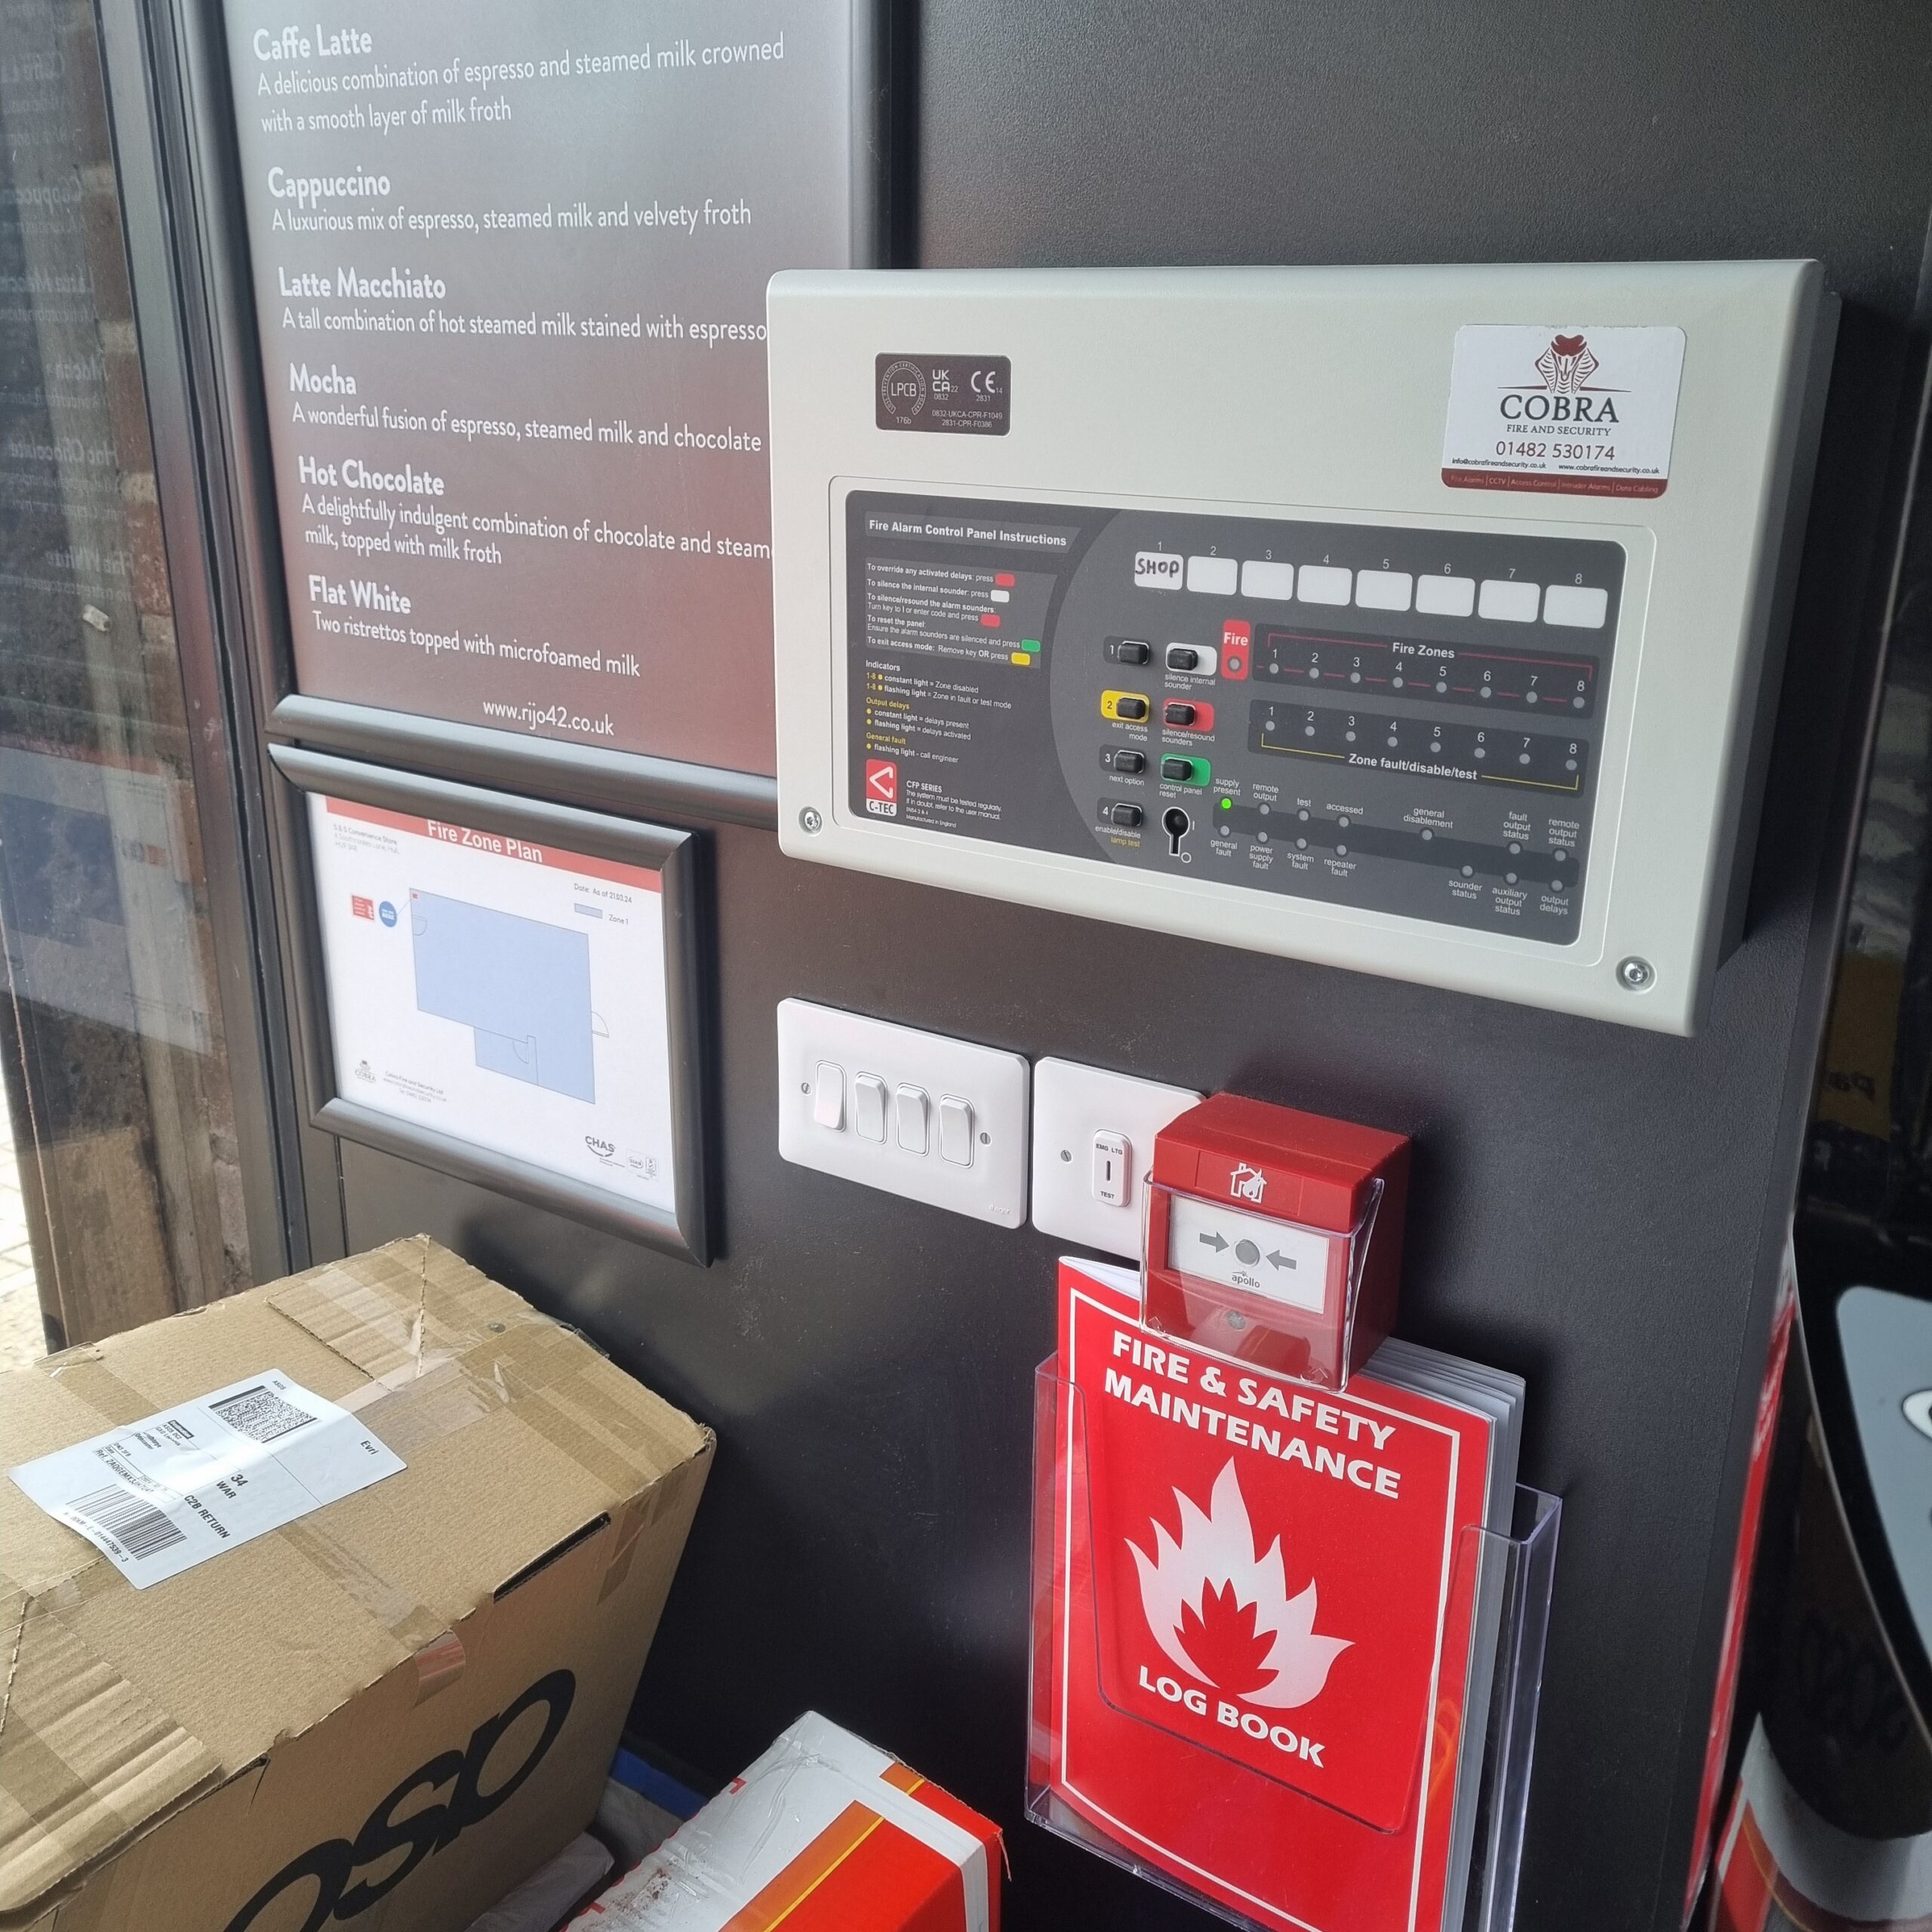 Image of a Fire Alarm control panel